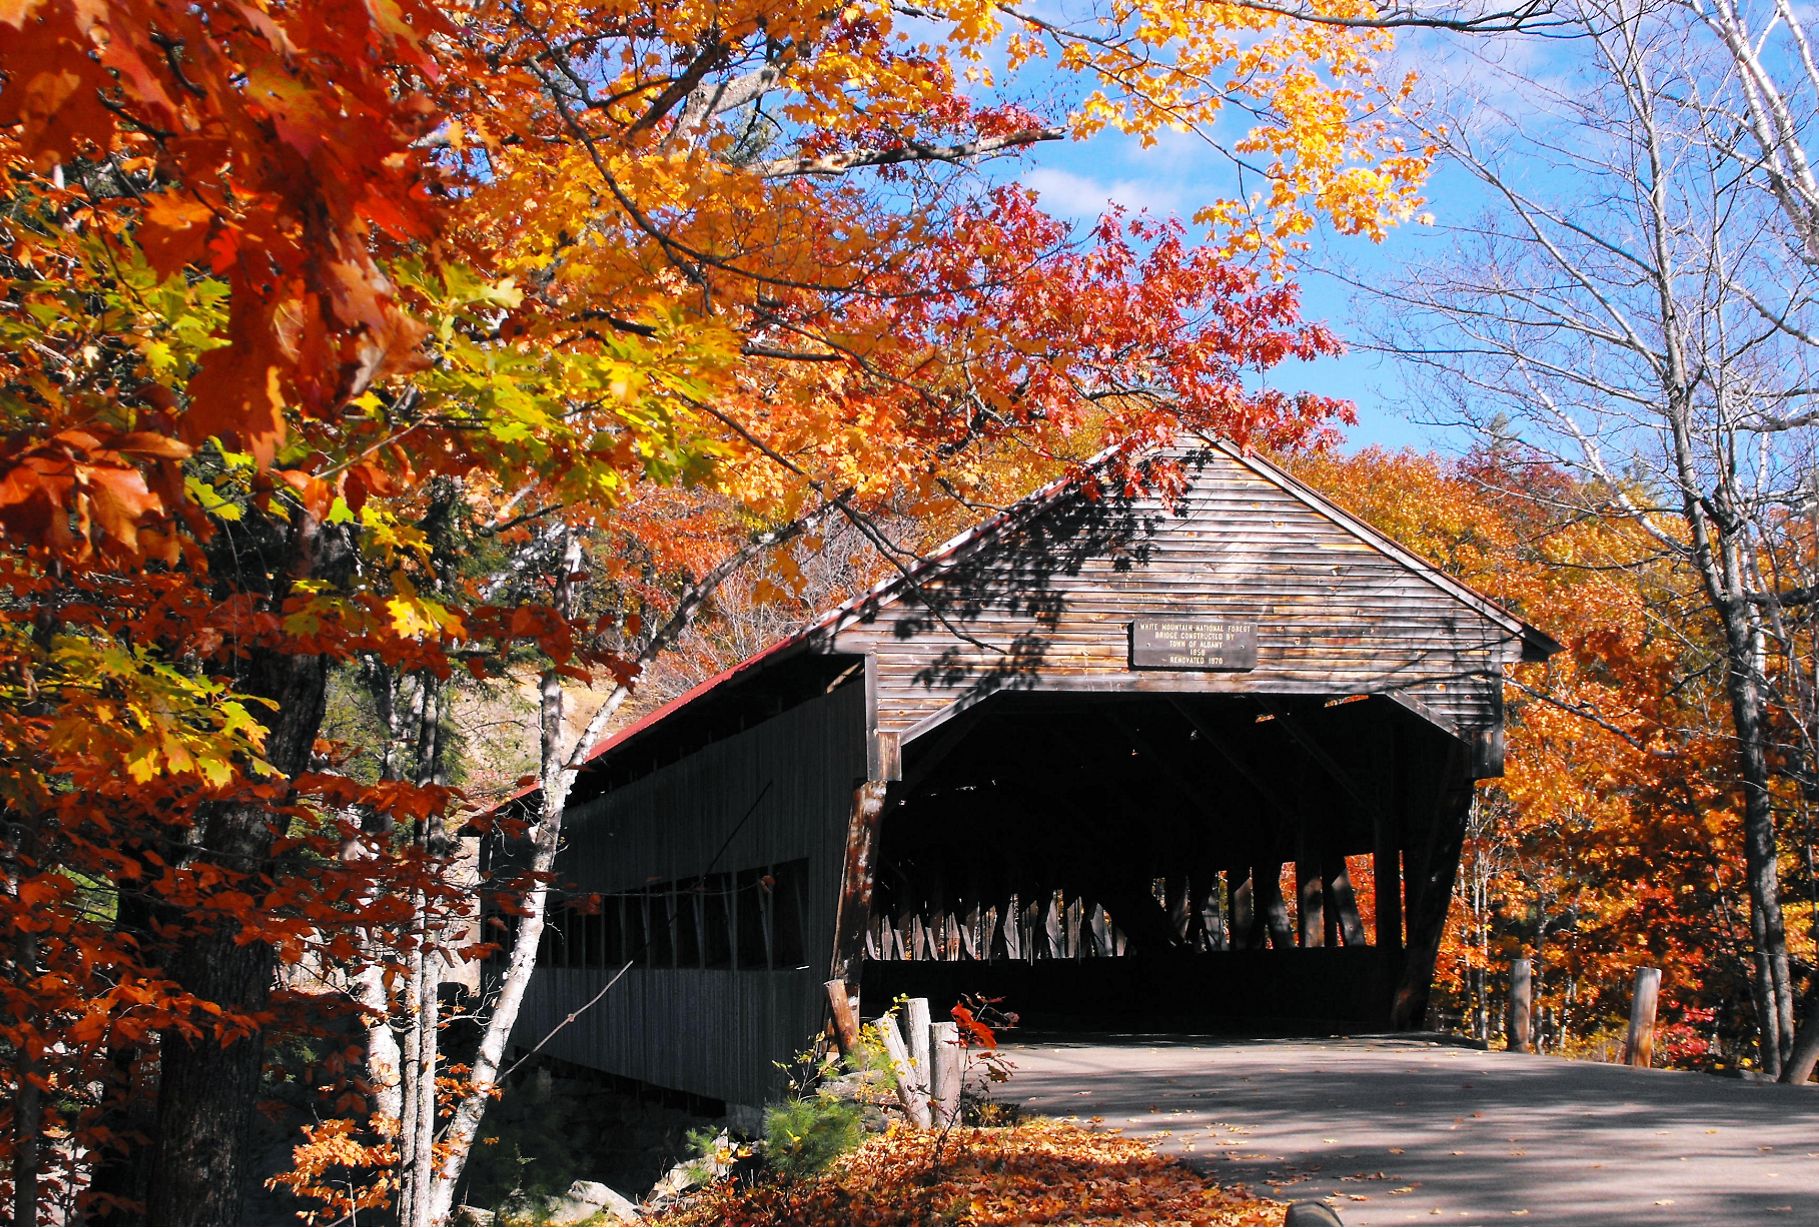 Covered Bridge In Northwood, Nh (user submitted)